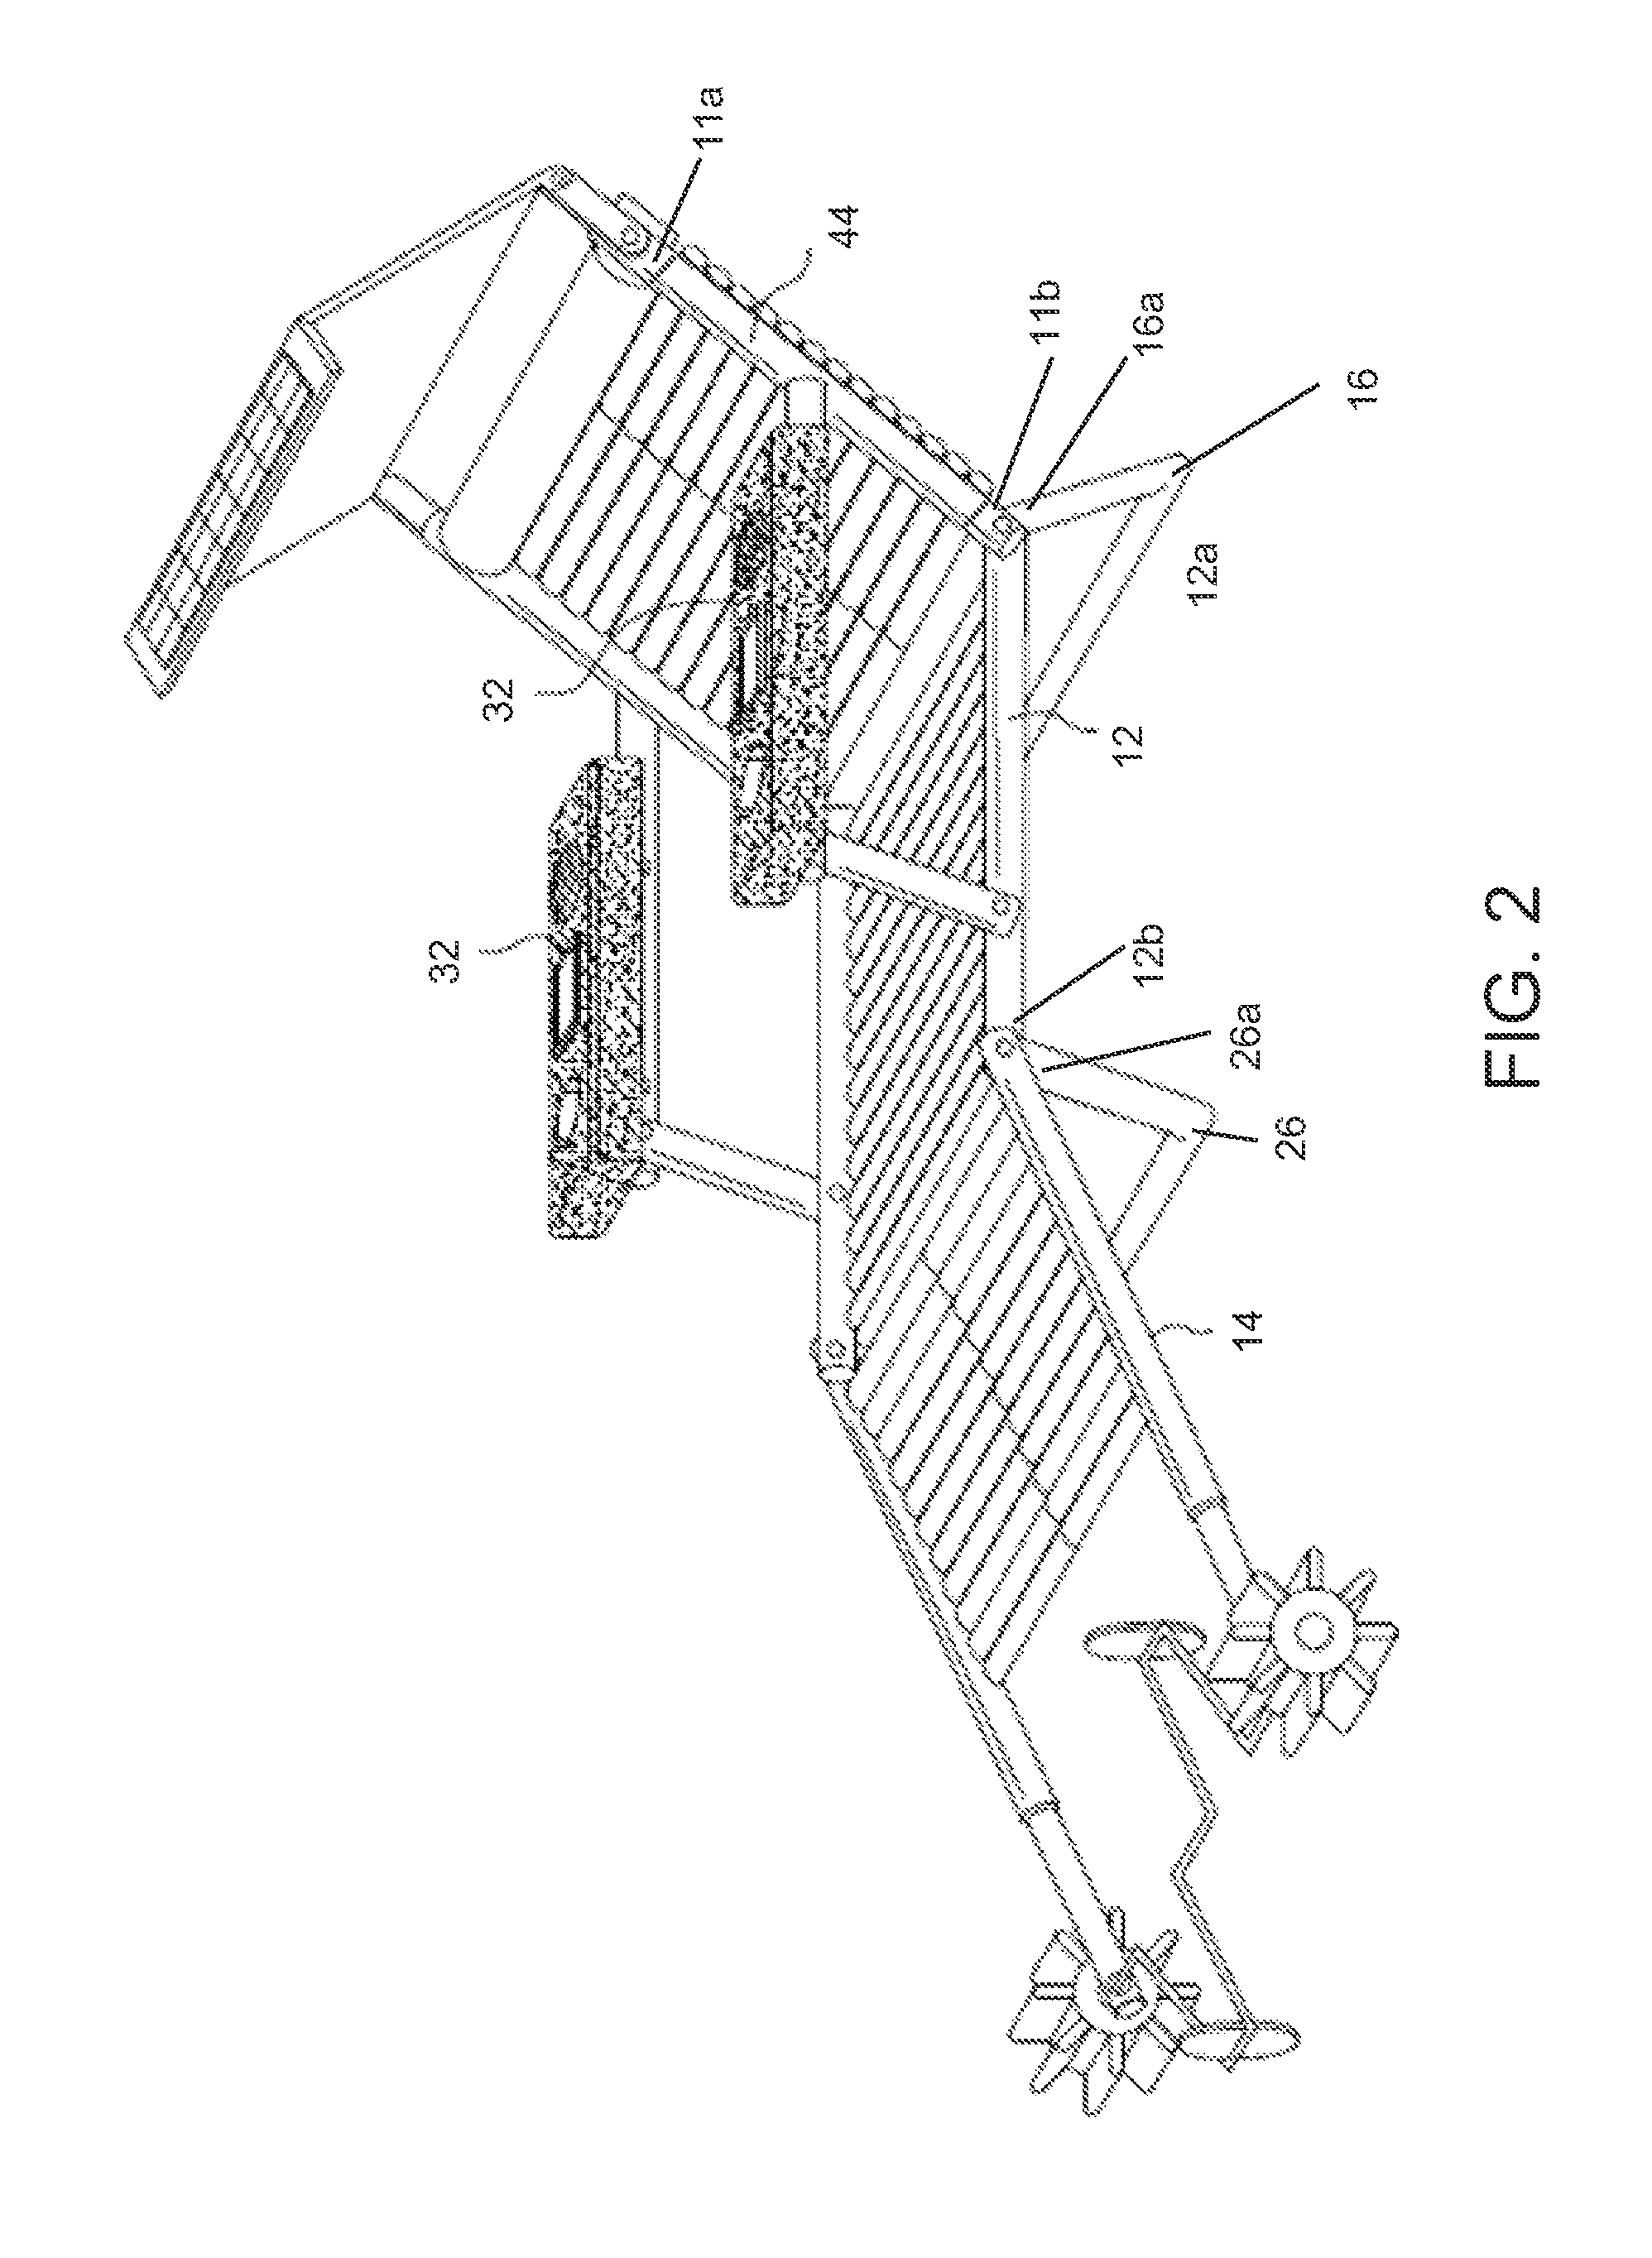 Submergible support and seating apparatus